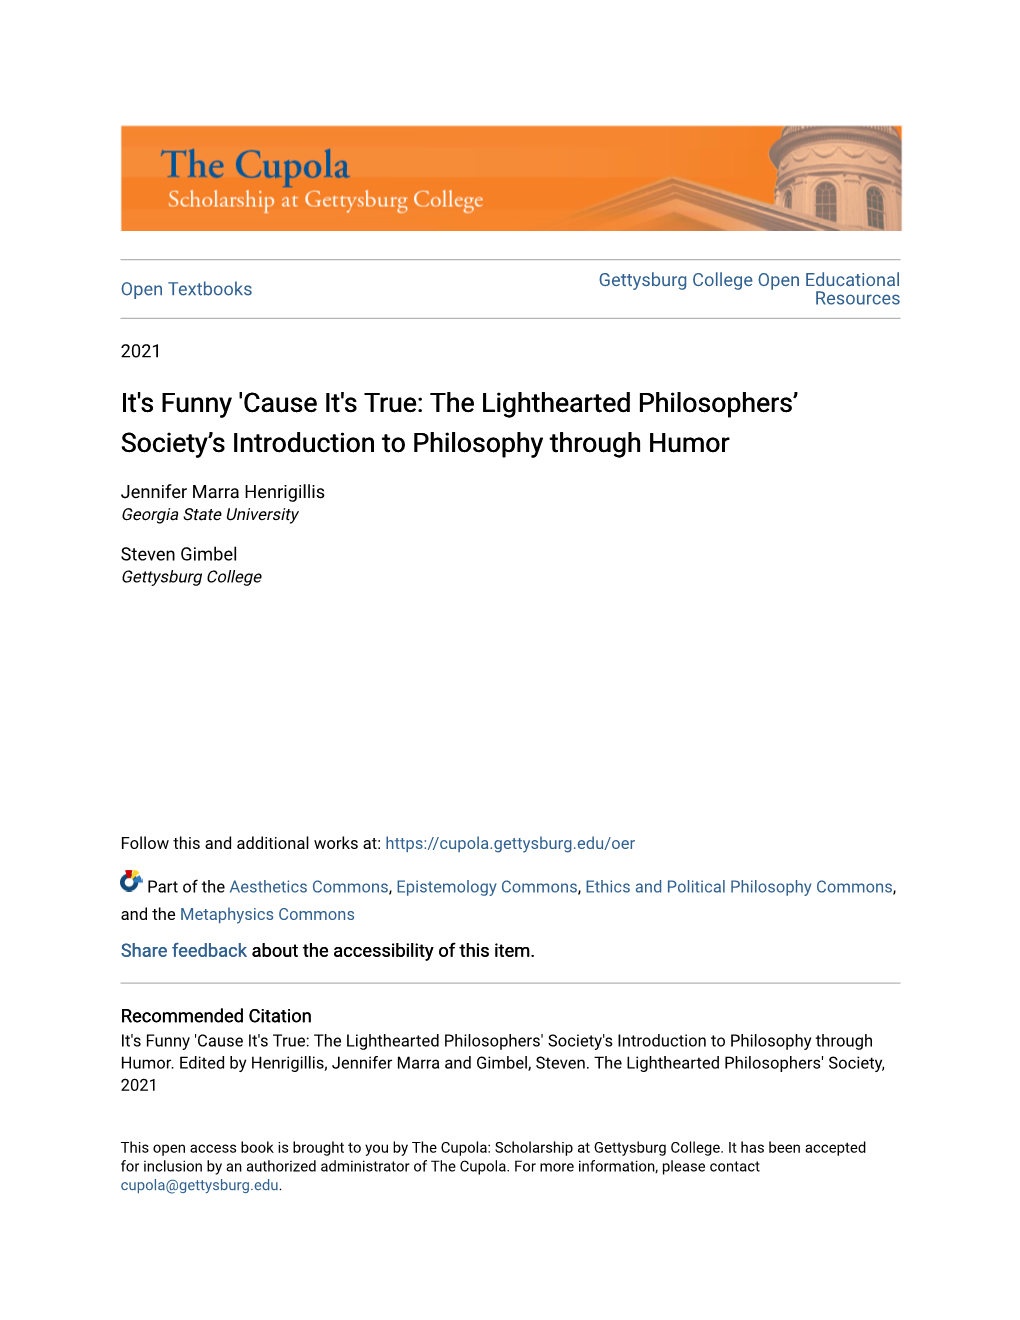 It's Funny 'Cause It's True: the Lighthearted Philosophers’ Society’S Introduction to Philosophy Through Humor